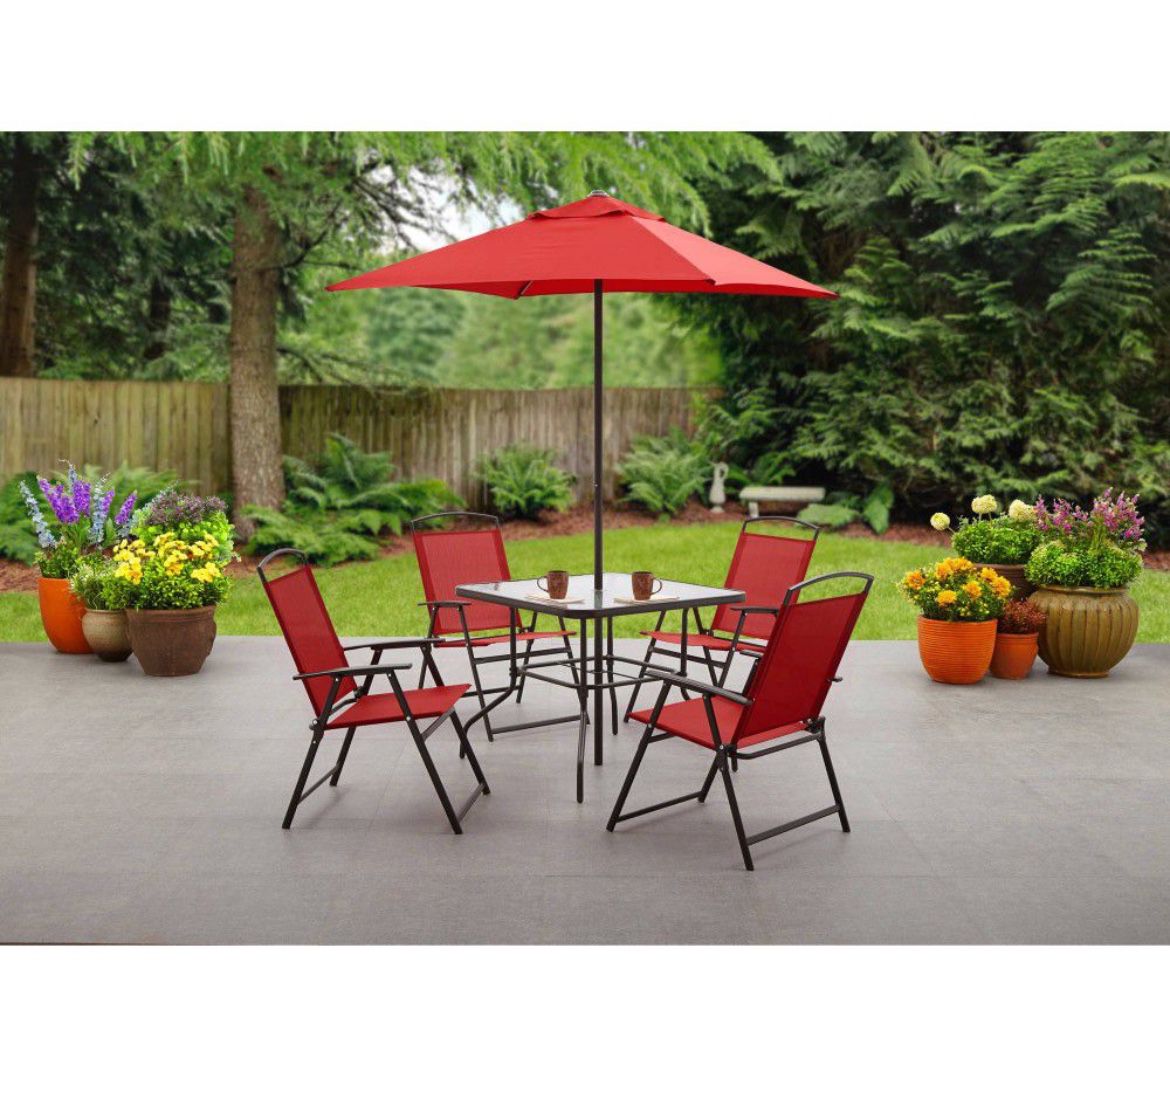 Patio Dining Set Red